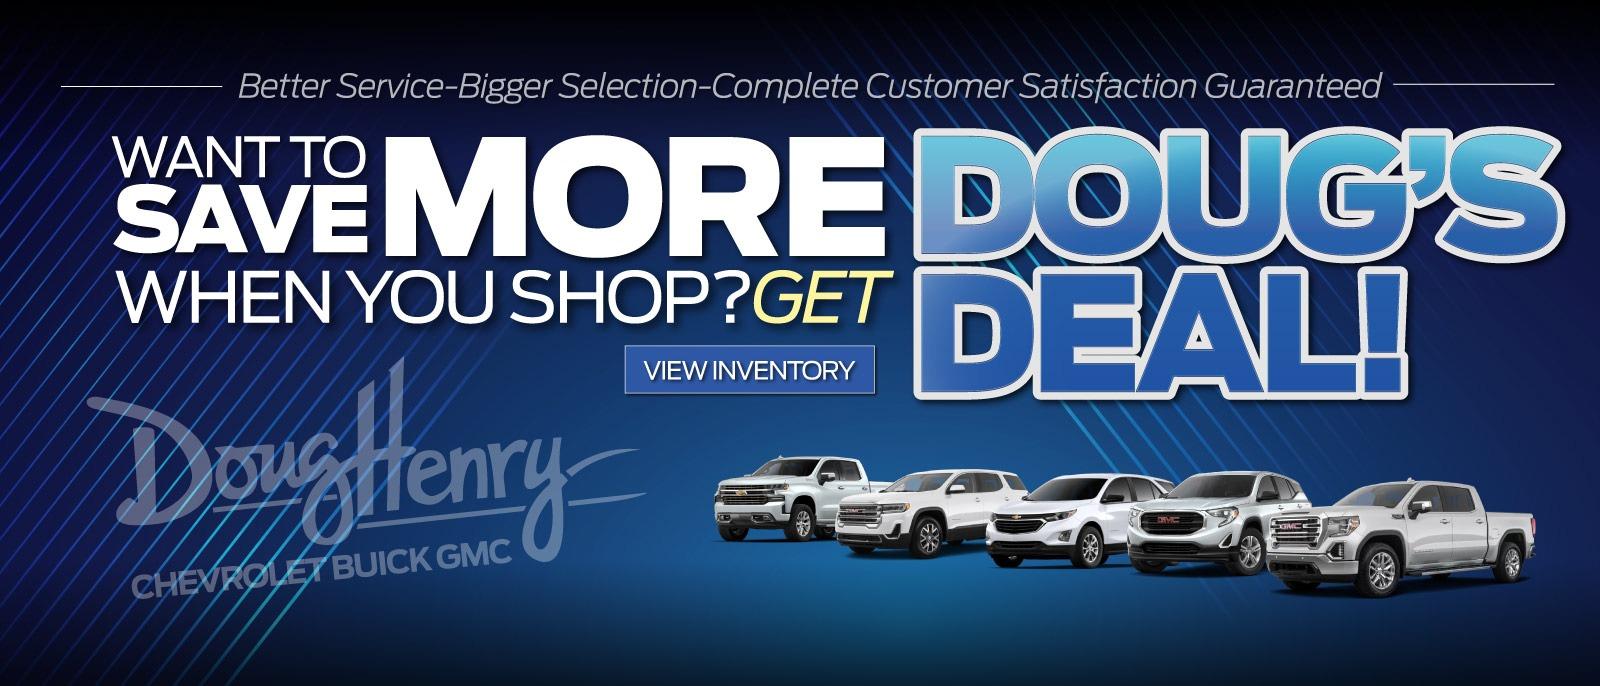 Want to Save More When You Shop? Click Here To View Inventory